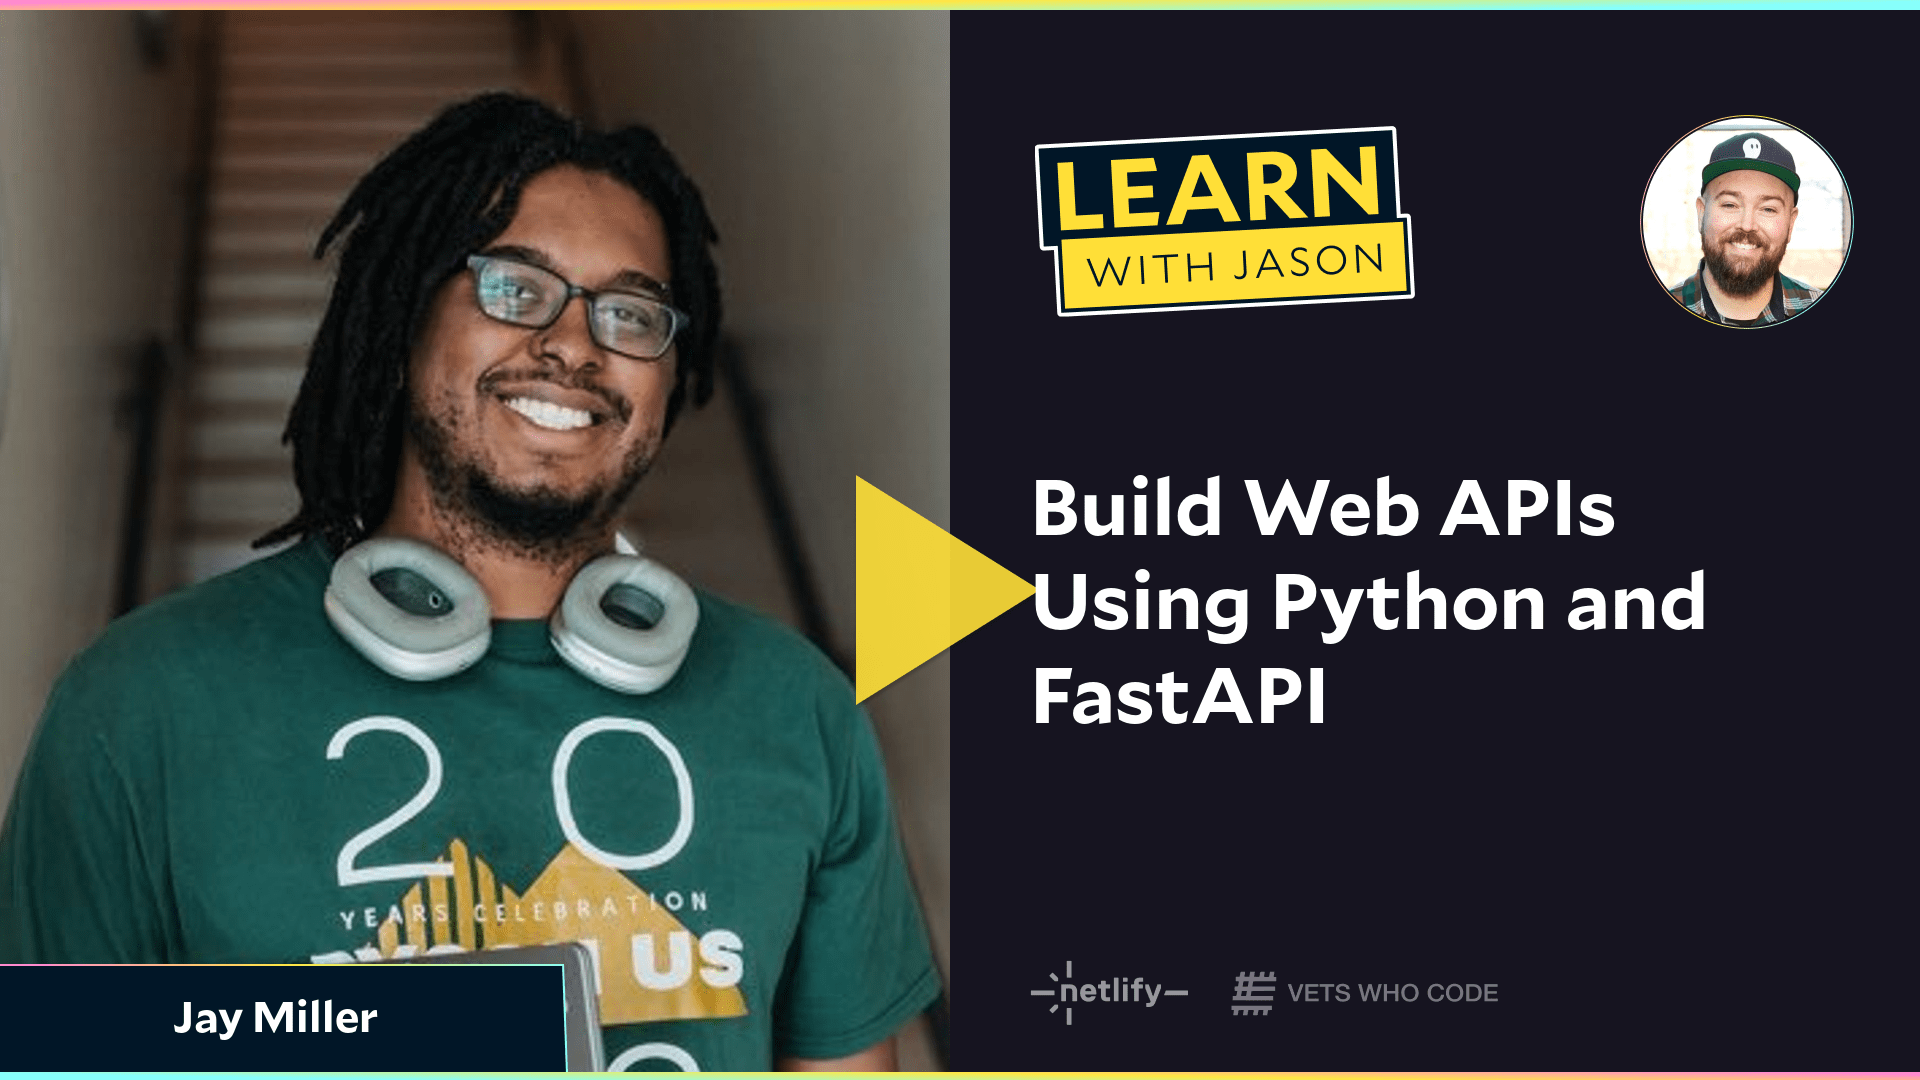 Build Web APIs Using Python and FastAPI (with Jay Miller)